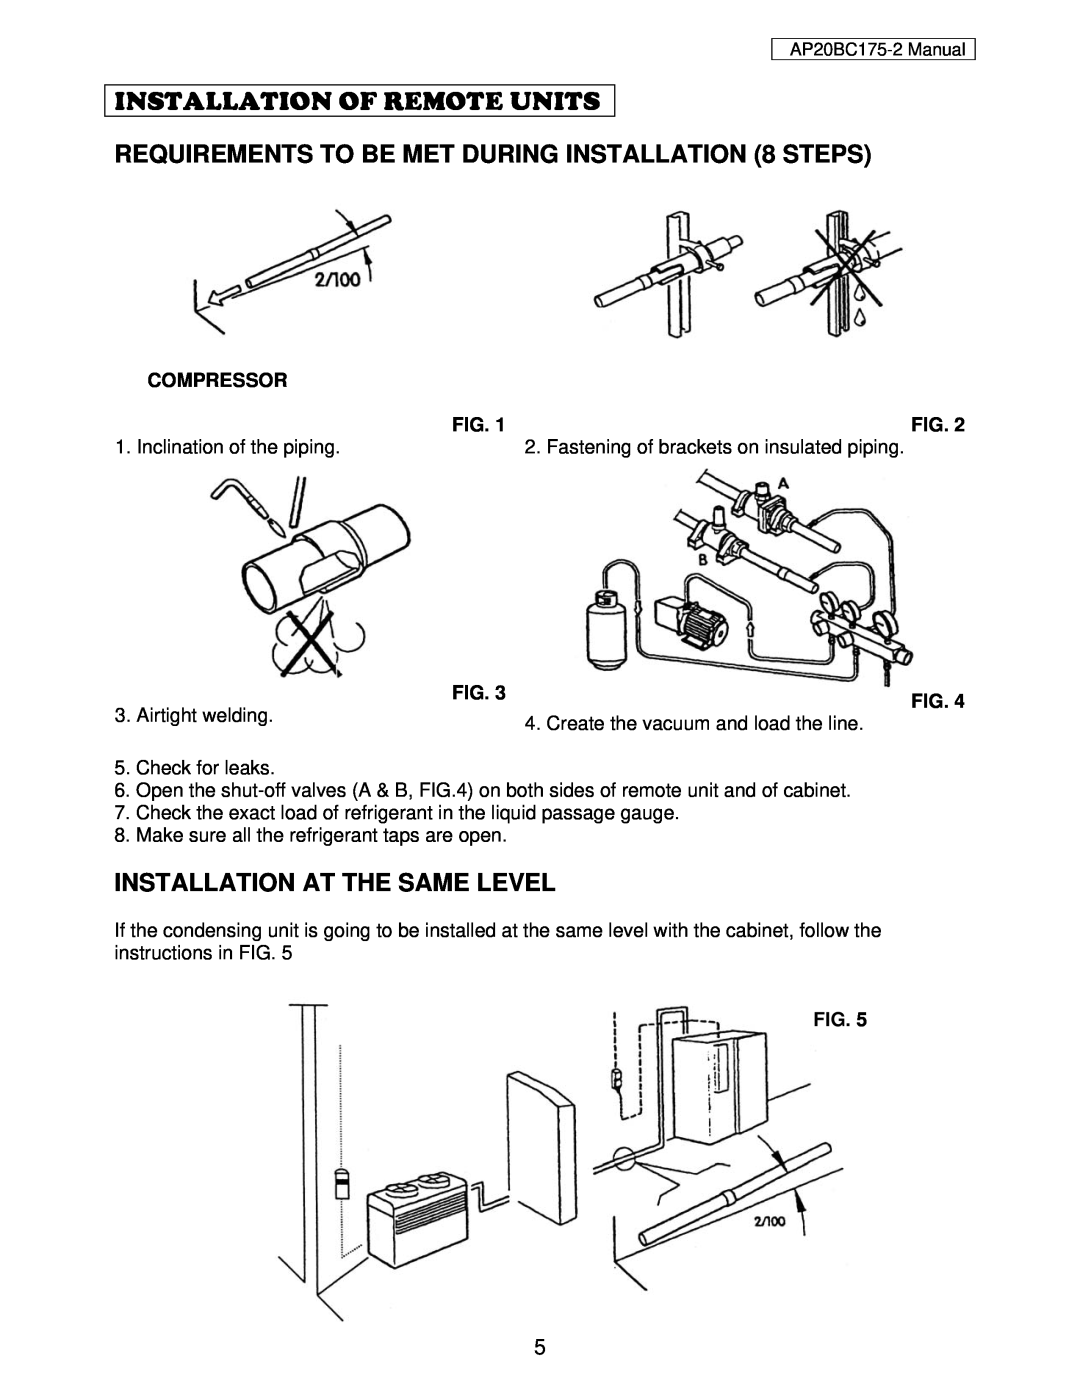 American Panel AP20BC175-2 user manual Installation Of Remote Units, REQUIREMENTS TO BE MET DURING INSTALLATION 8 STEPS 